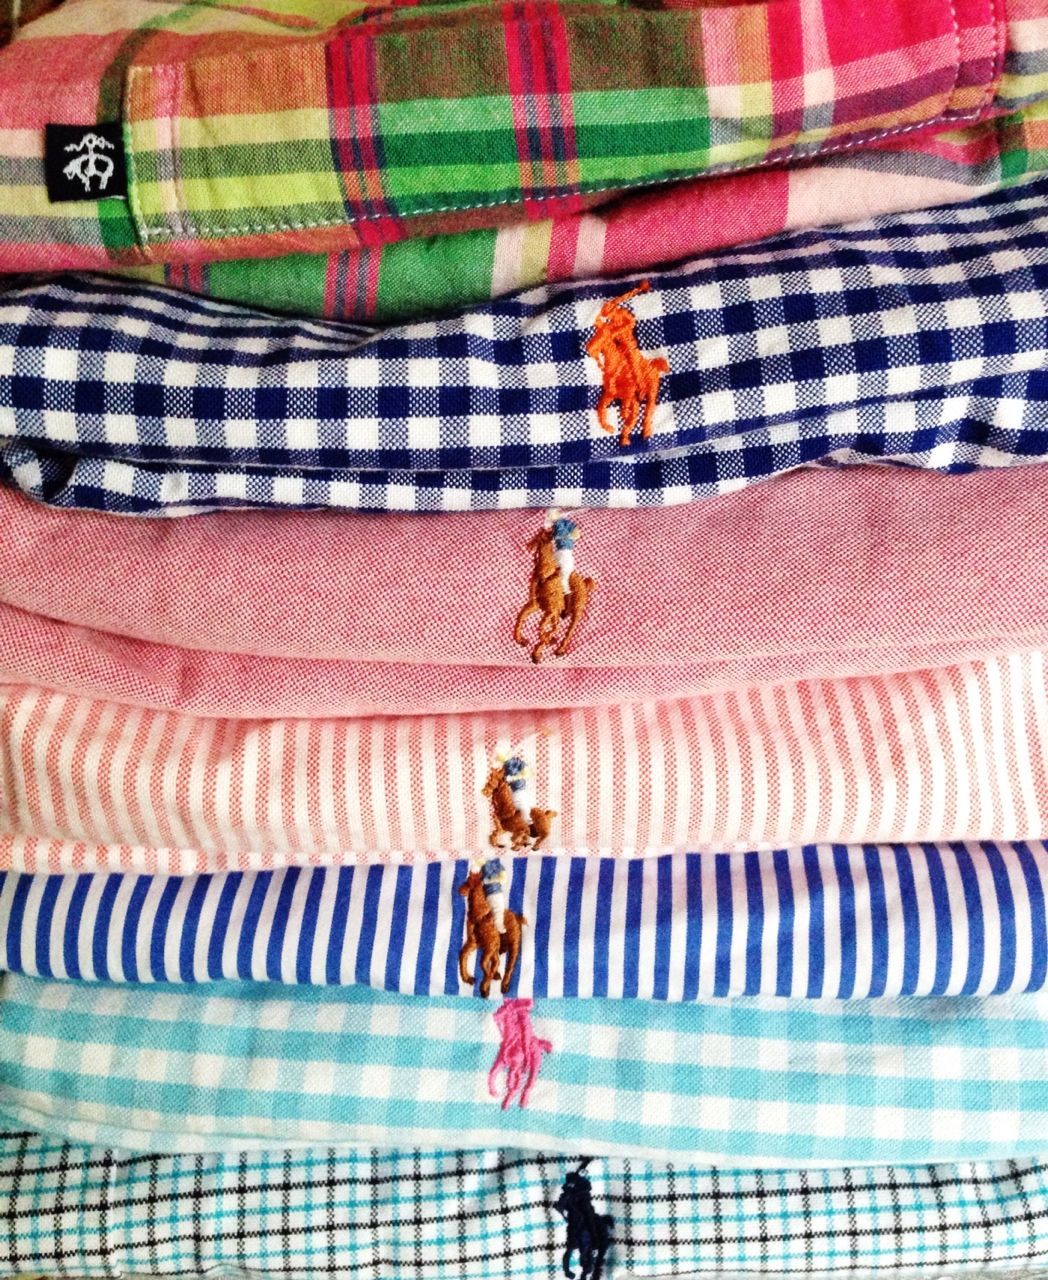 Summer colors from Ralph Lauren.....hes got the vocabulary of East Coast prep down....